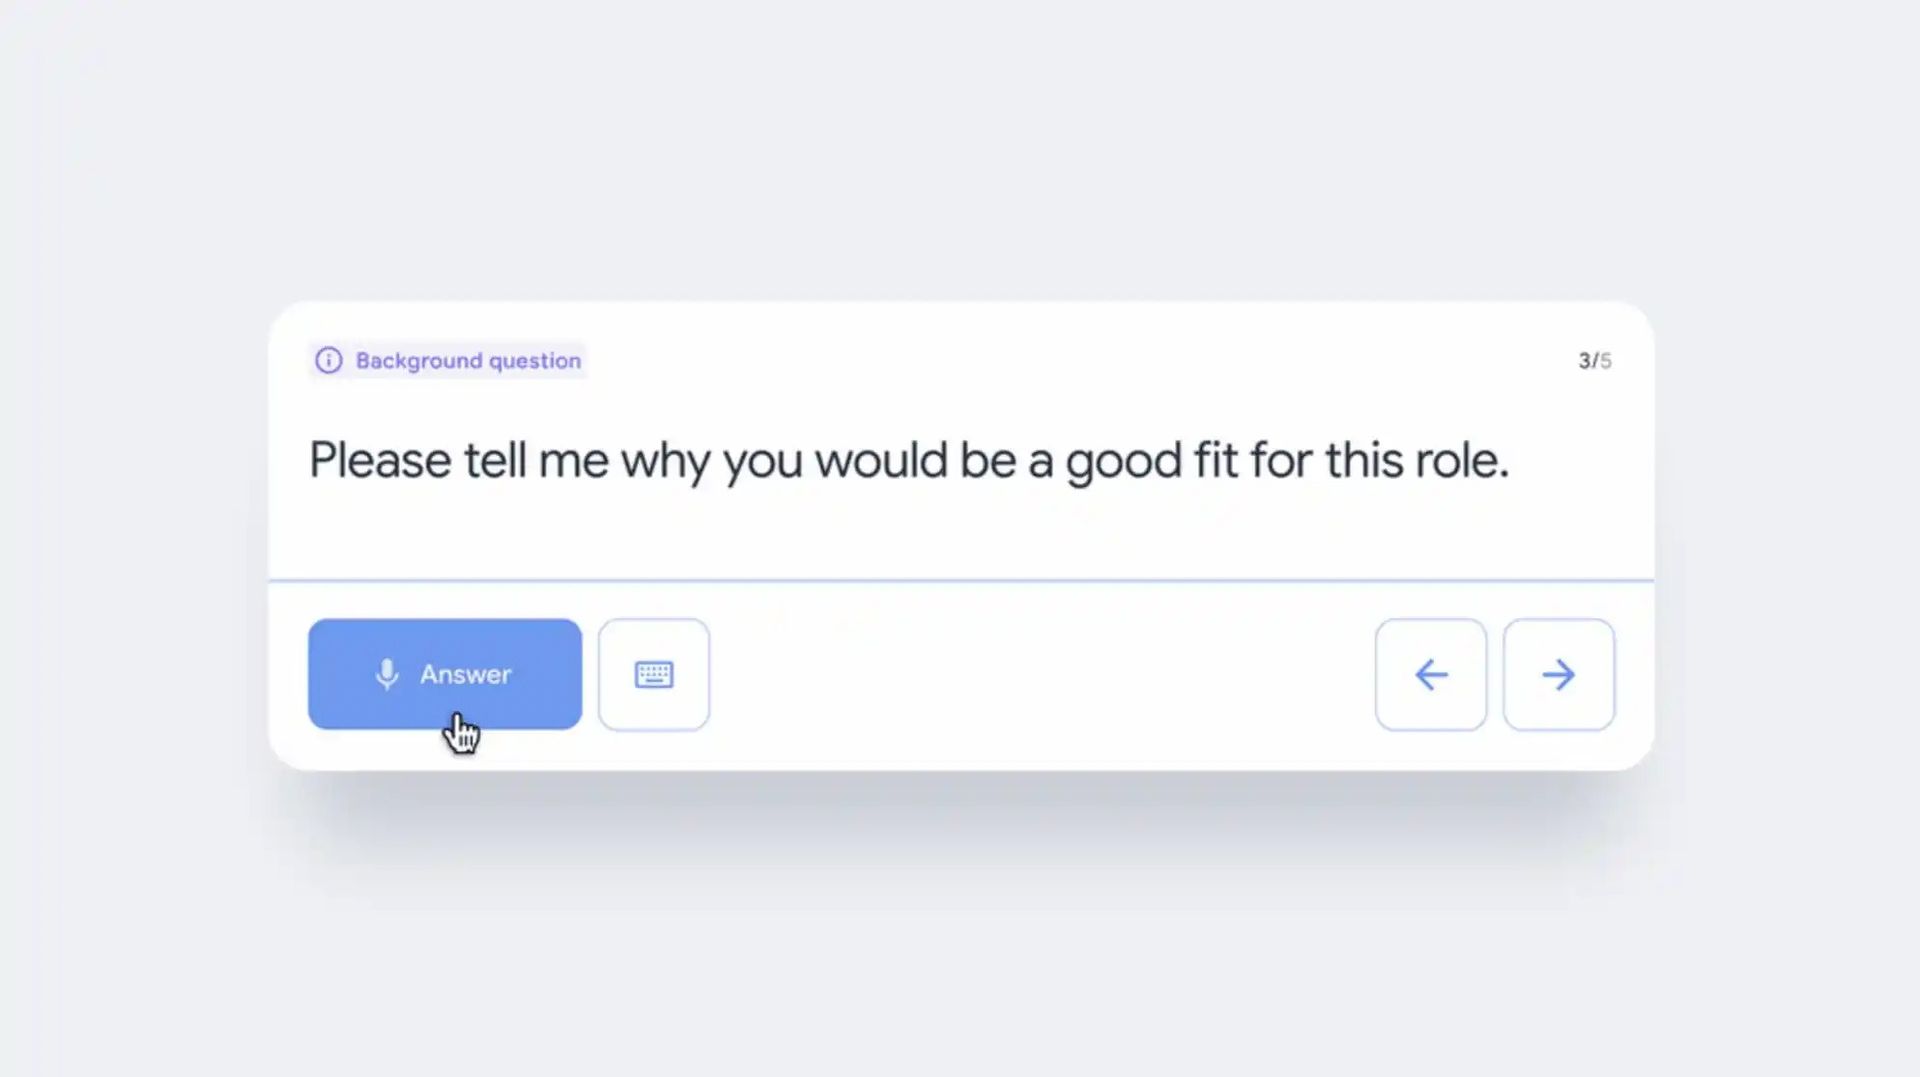 If you are feeling nervous before a job interview, the new AI tool called Google Interview Warmup will help you to practice beforehand. Google now has a tool to assist candidates in practicing job interviews. It's true that job interviews can be stressful. You may practice and be more prepared before going into an interview thanks to Google's new tool.